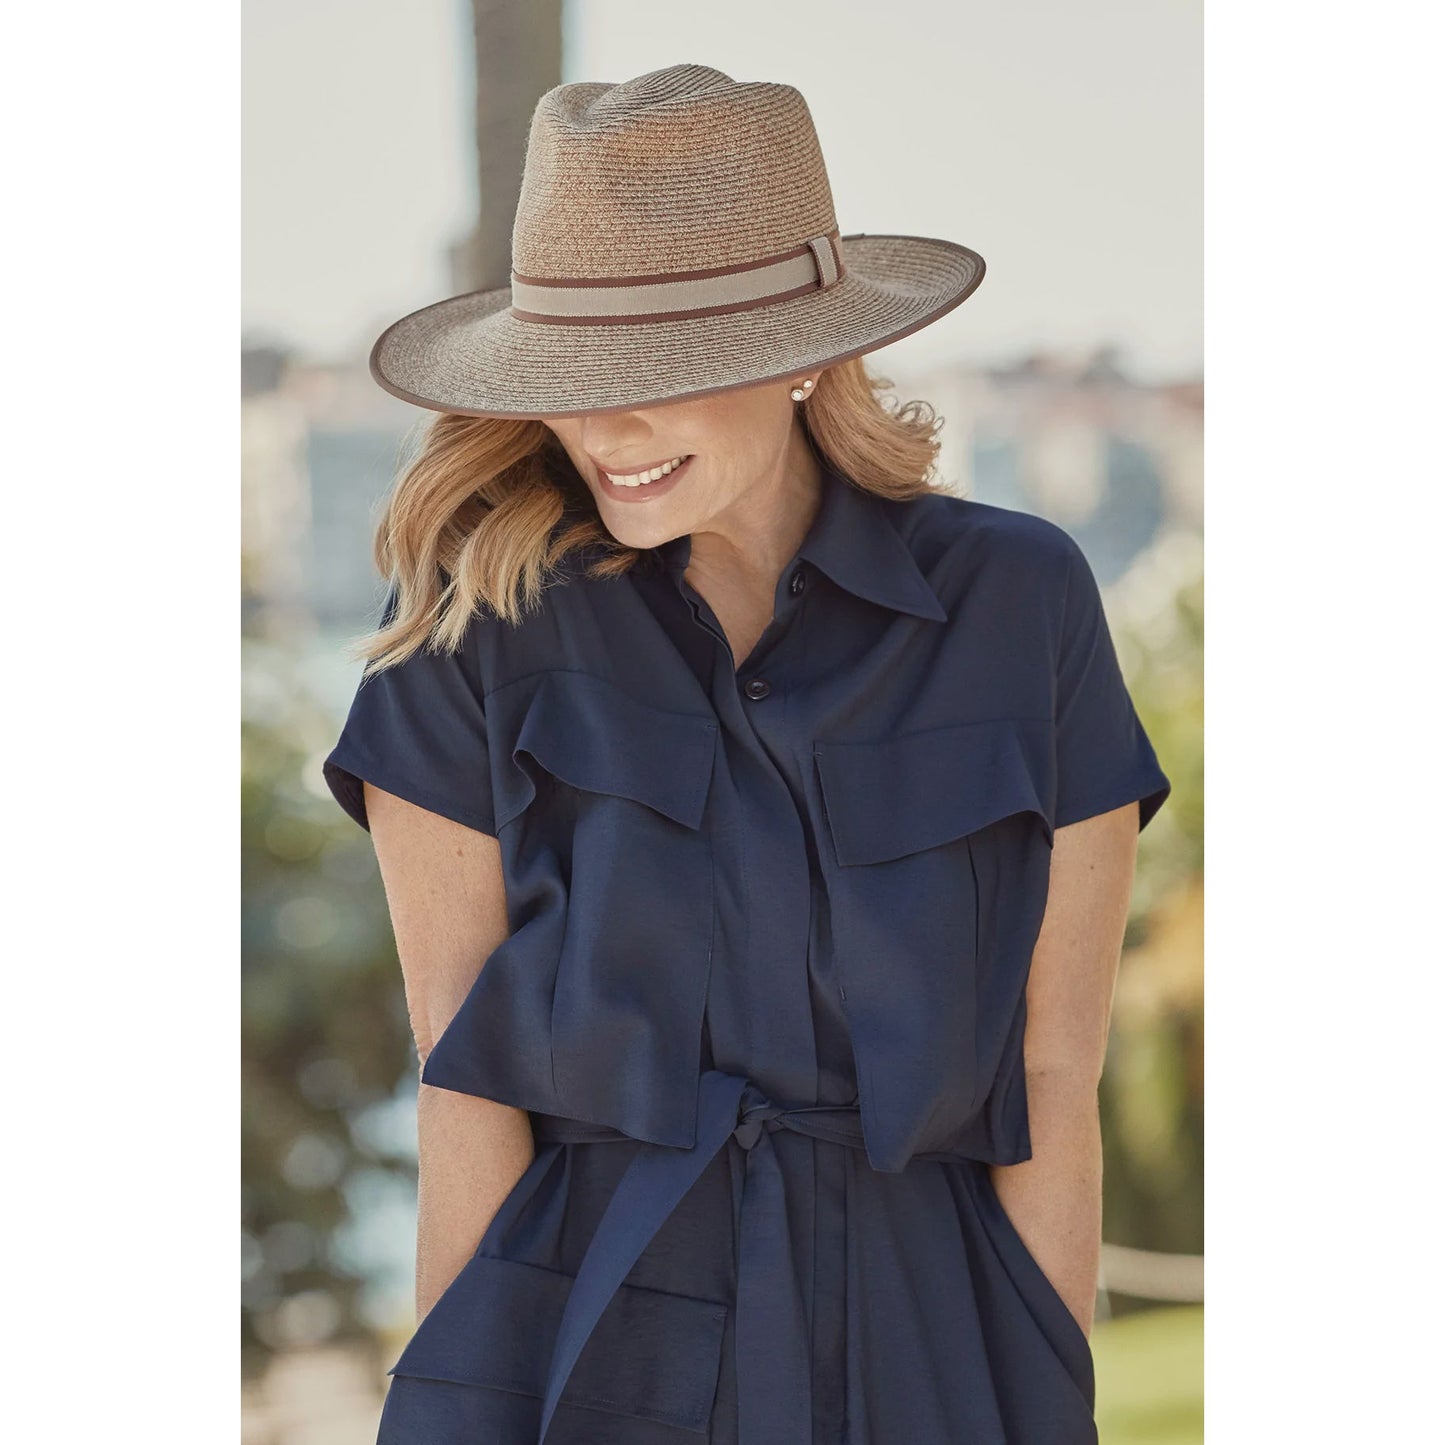 Canopy Bay Royston Fedora - Camel  Canopy Bay Pisces Boutique